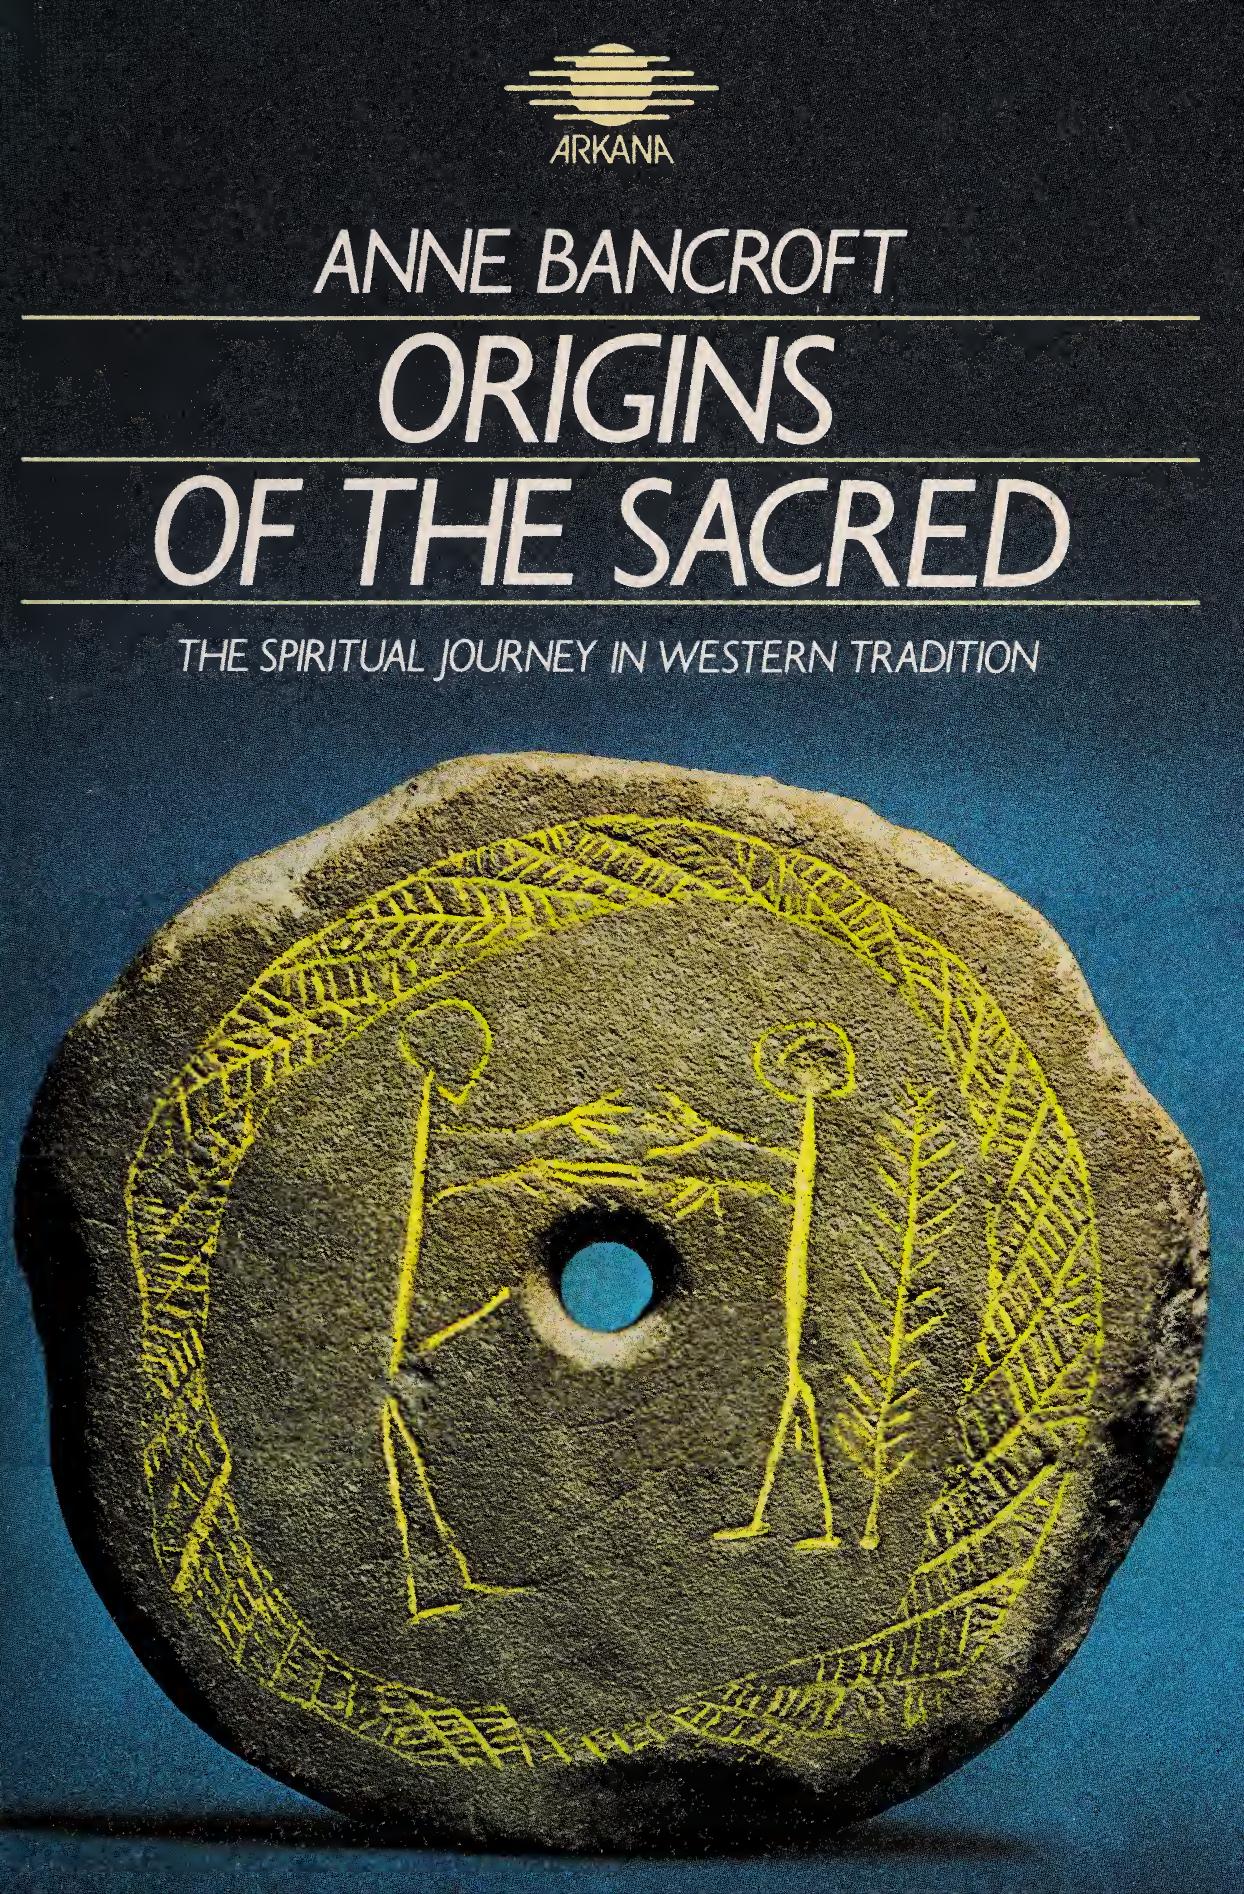 Origins of the Sacred: The Way of the Sacred in Western Tradition